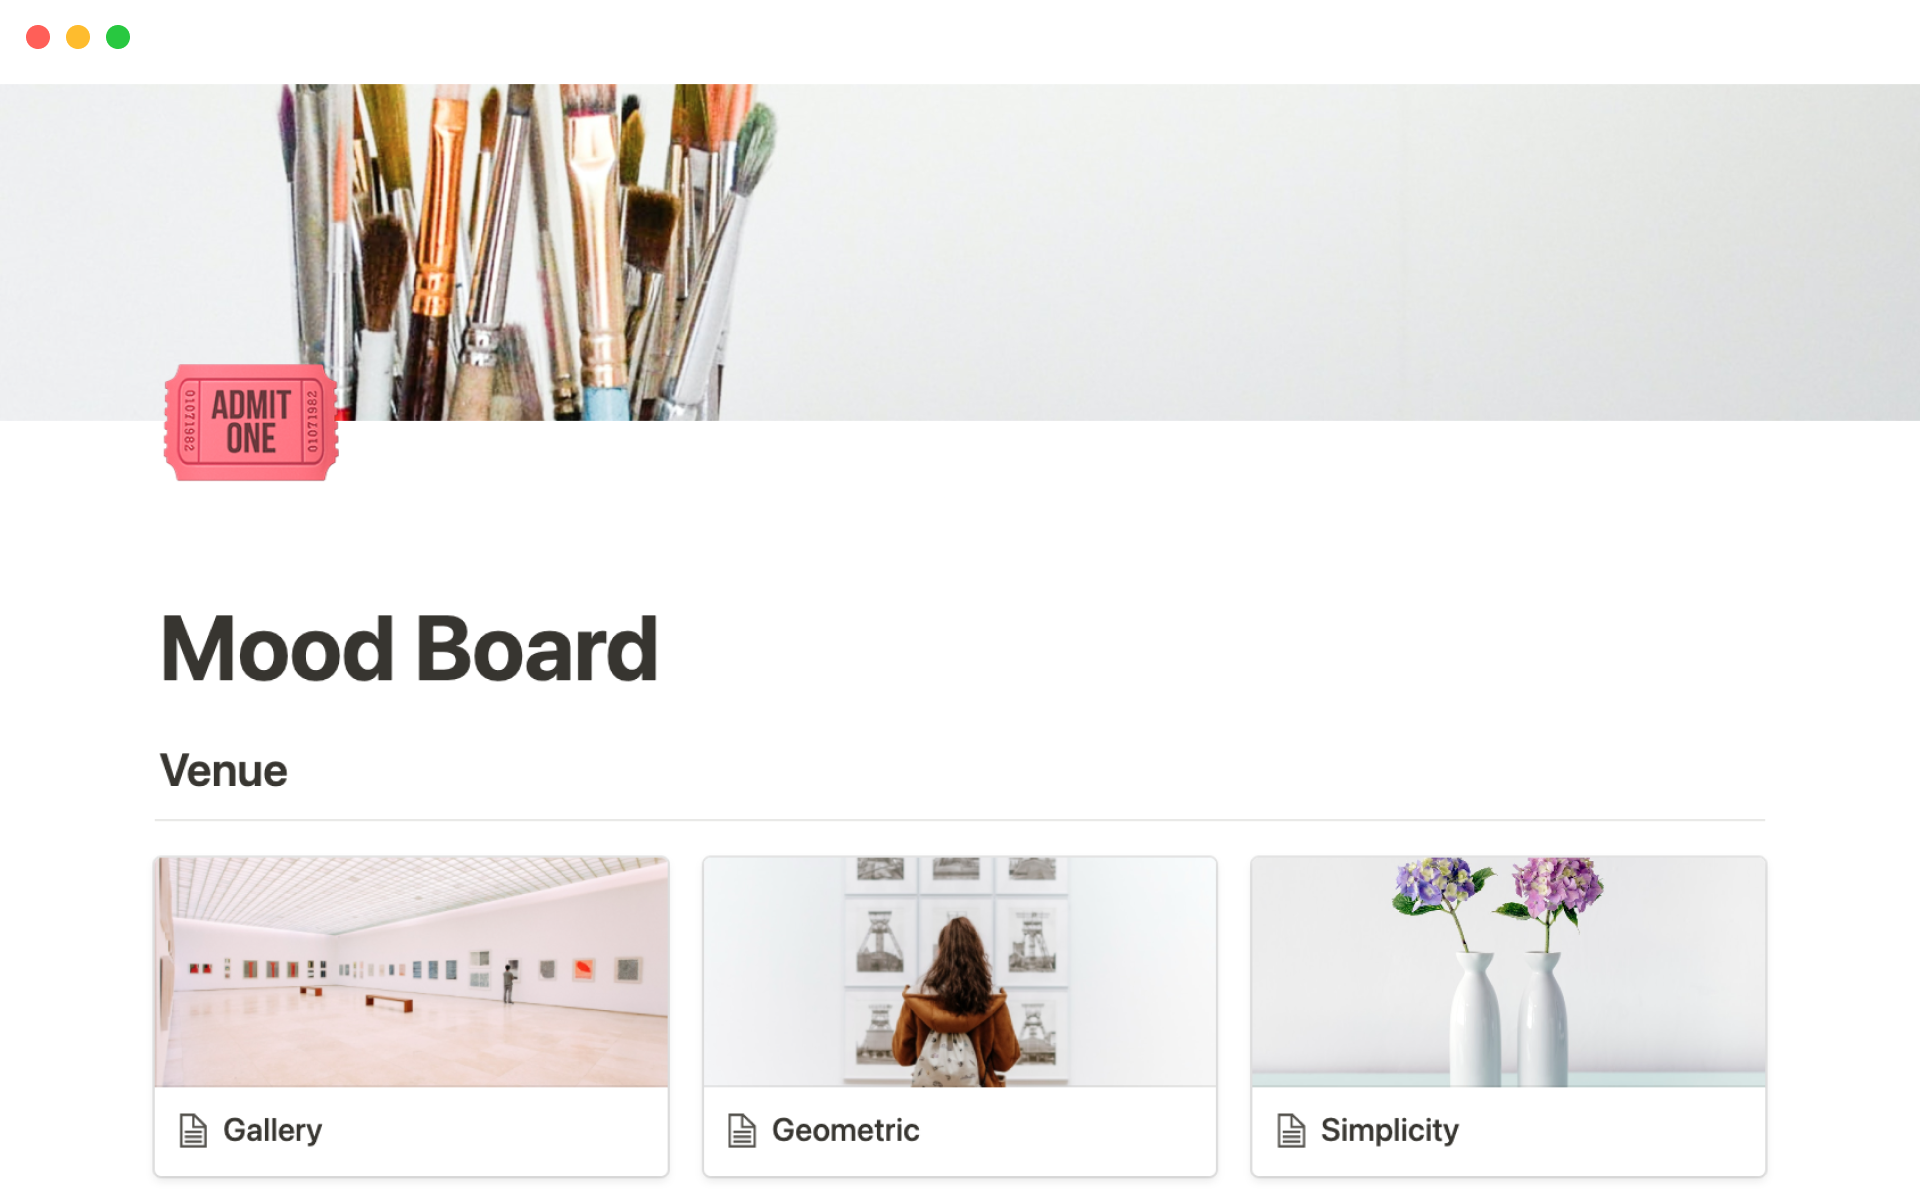 Assemble mood or inspiration boards for events, products, brand campaigns, and more.